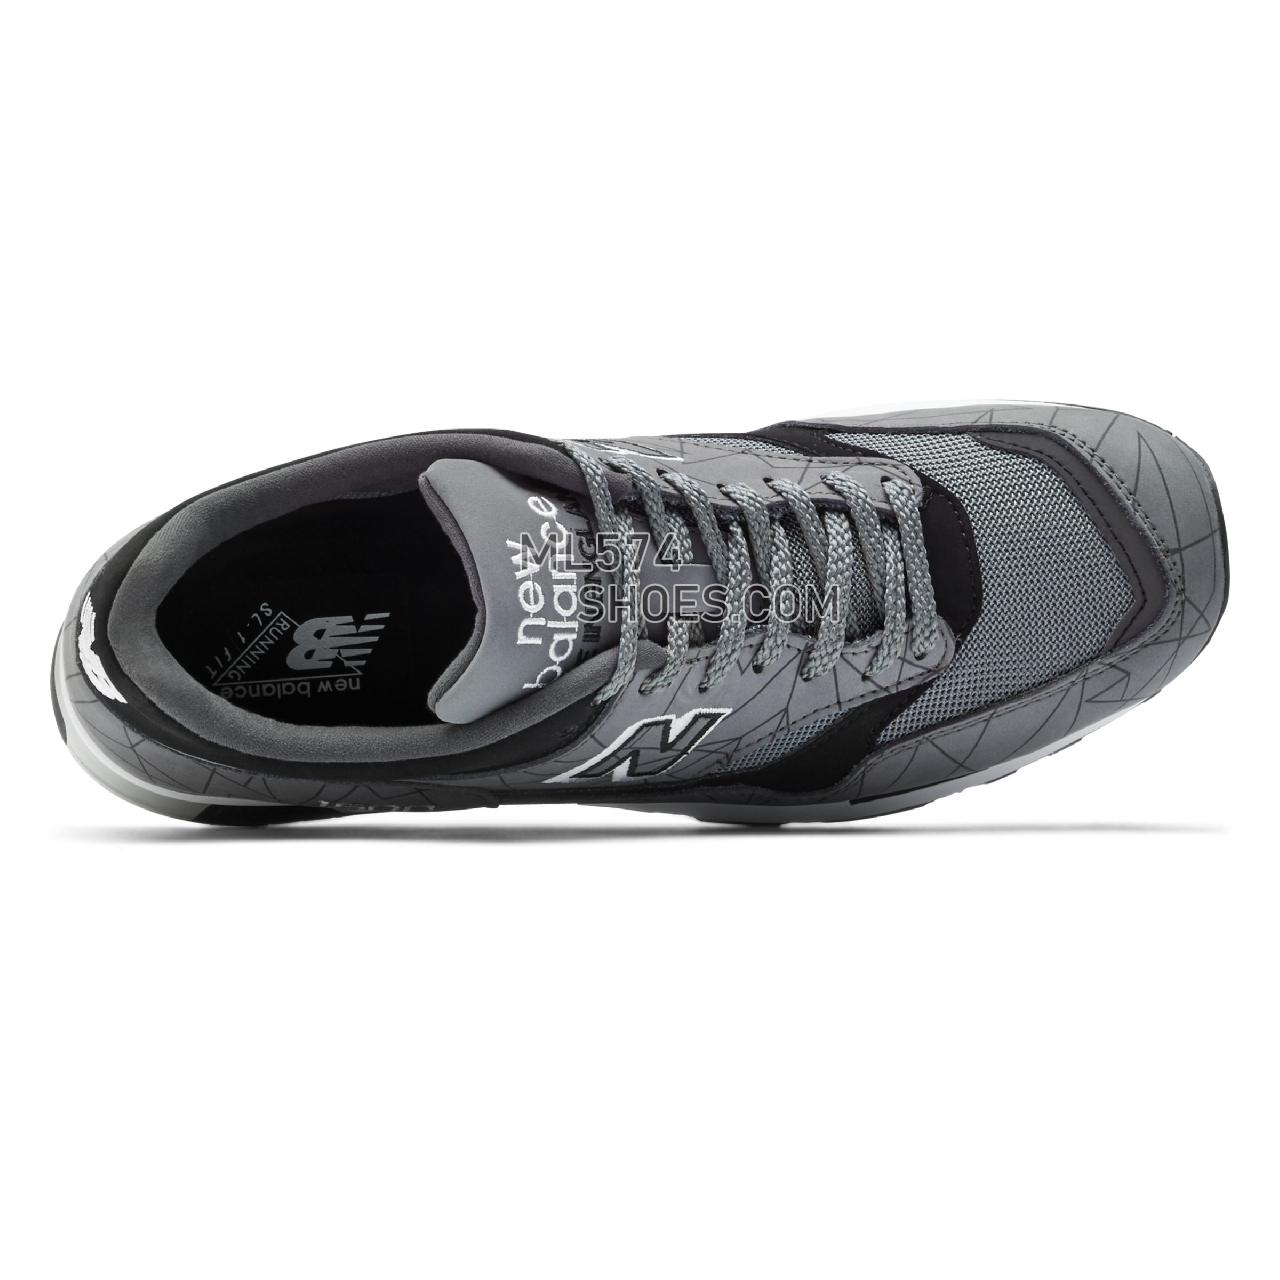 New Balance MADE in UK 1500 - Men's Made in USA And UK Sneakers - Black with White and Silver - M1500PNU